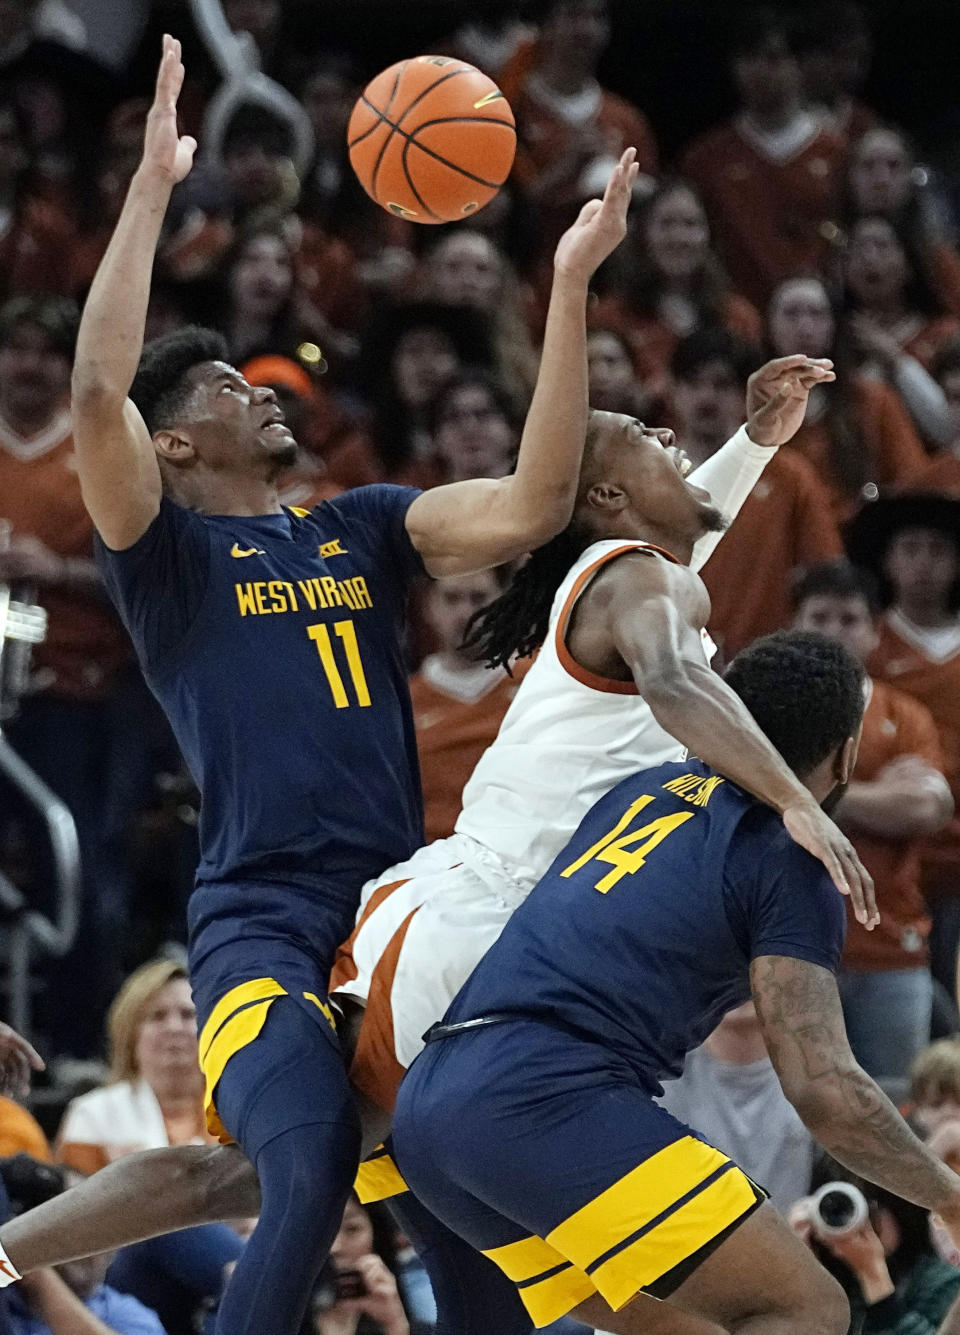 Texas guard Marcus Carr, center, loses control of the ball as he is defended by West Virginia forward Mohamed Wague (11) and guard Seth Wilson (14) during the first half of an NCAA college basketball game in Austin, Texas, Saturday, Feb. 11, 2023. (AP Photo/Eric Gay)